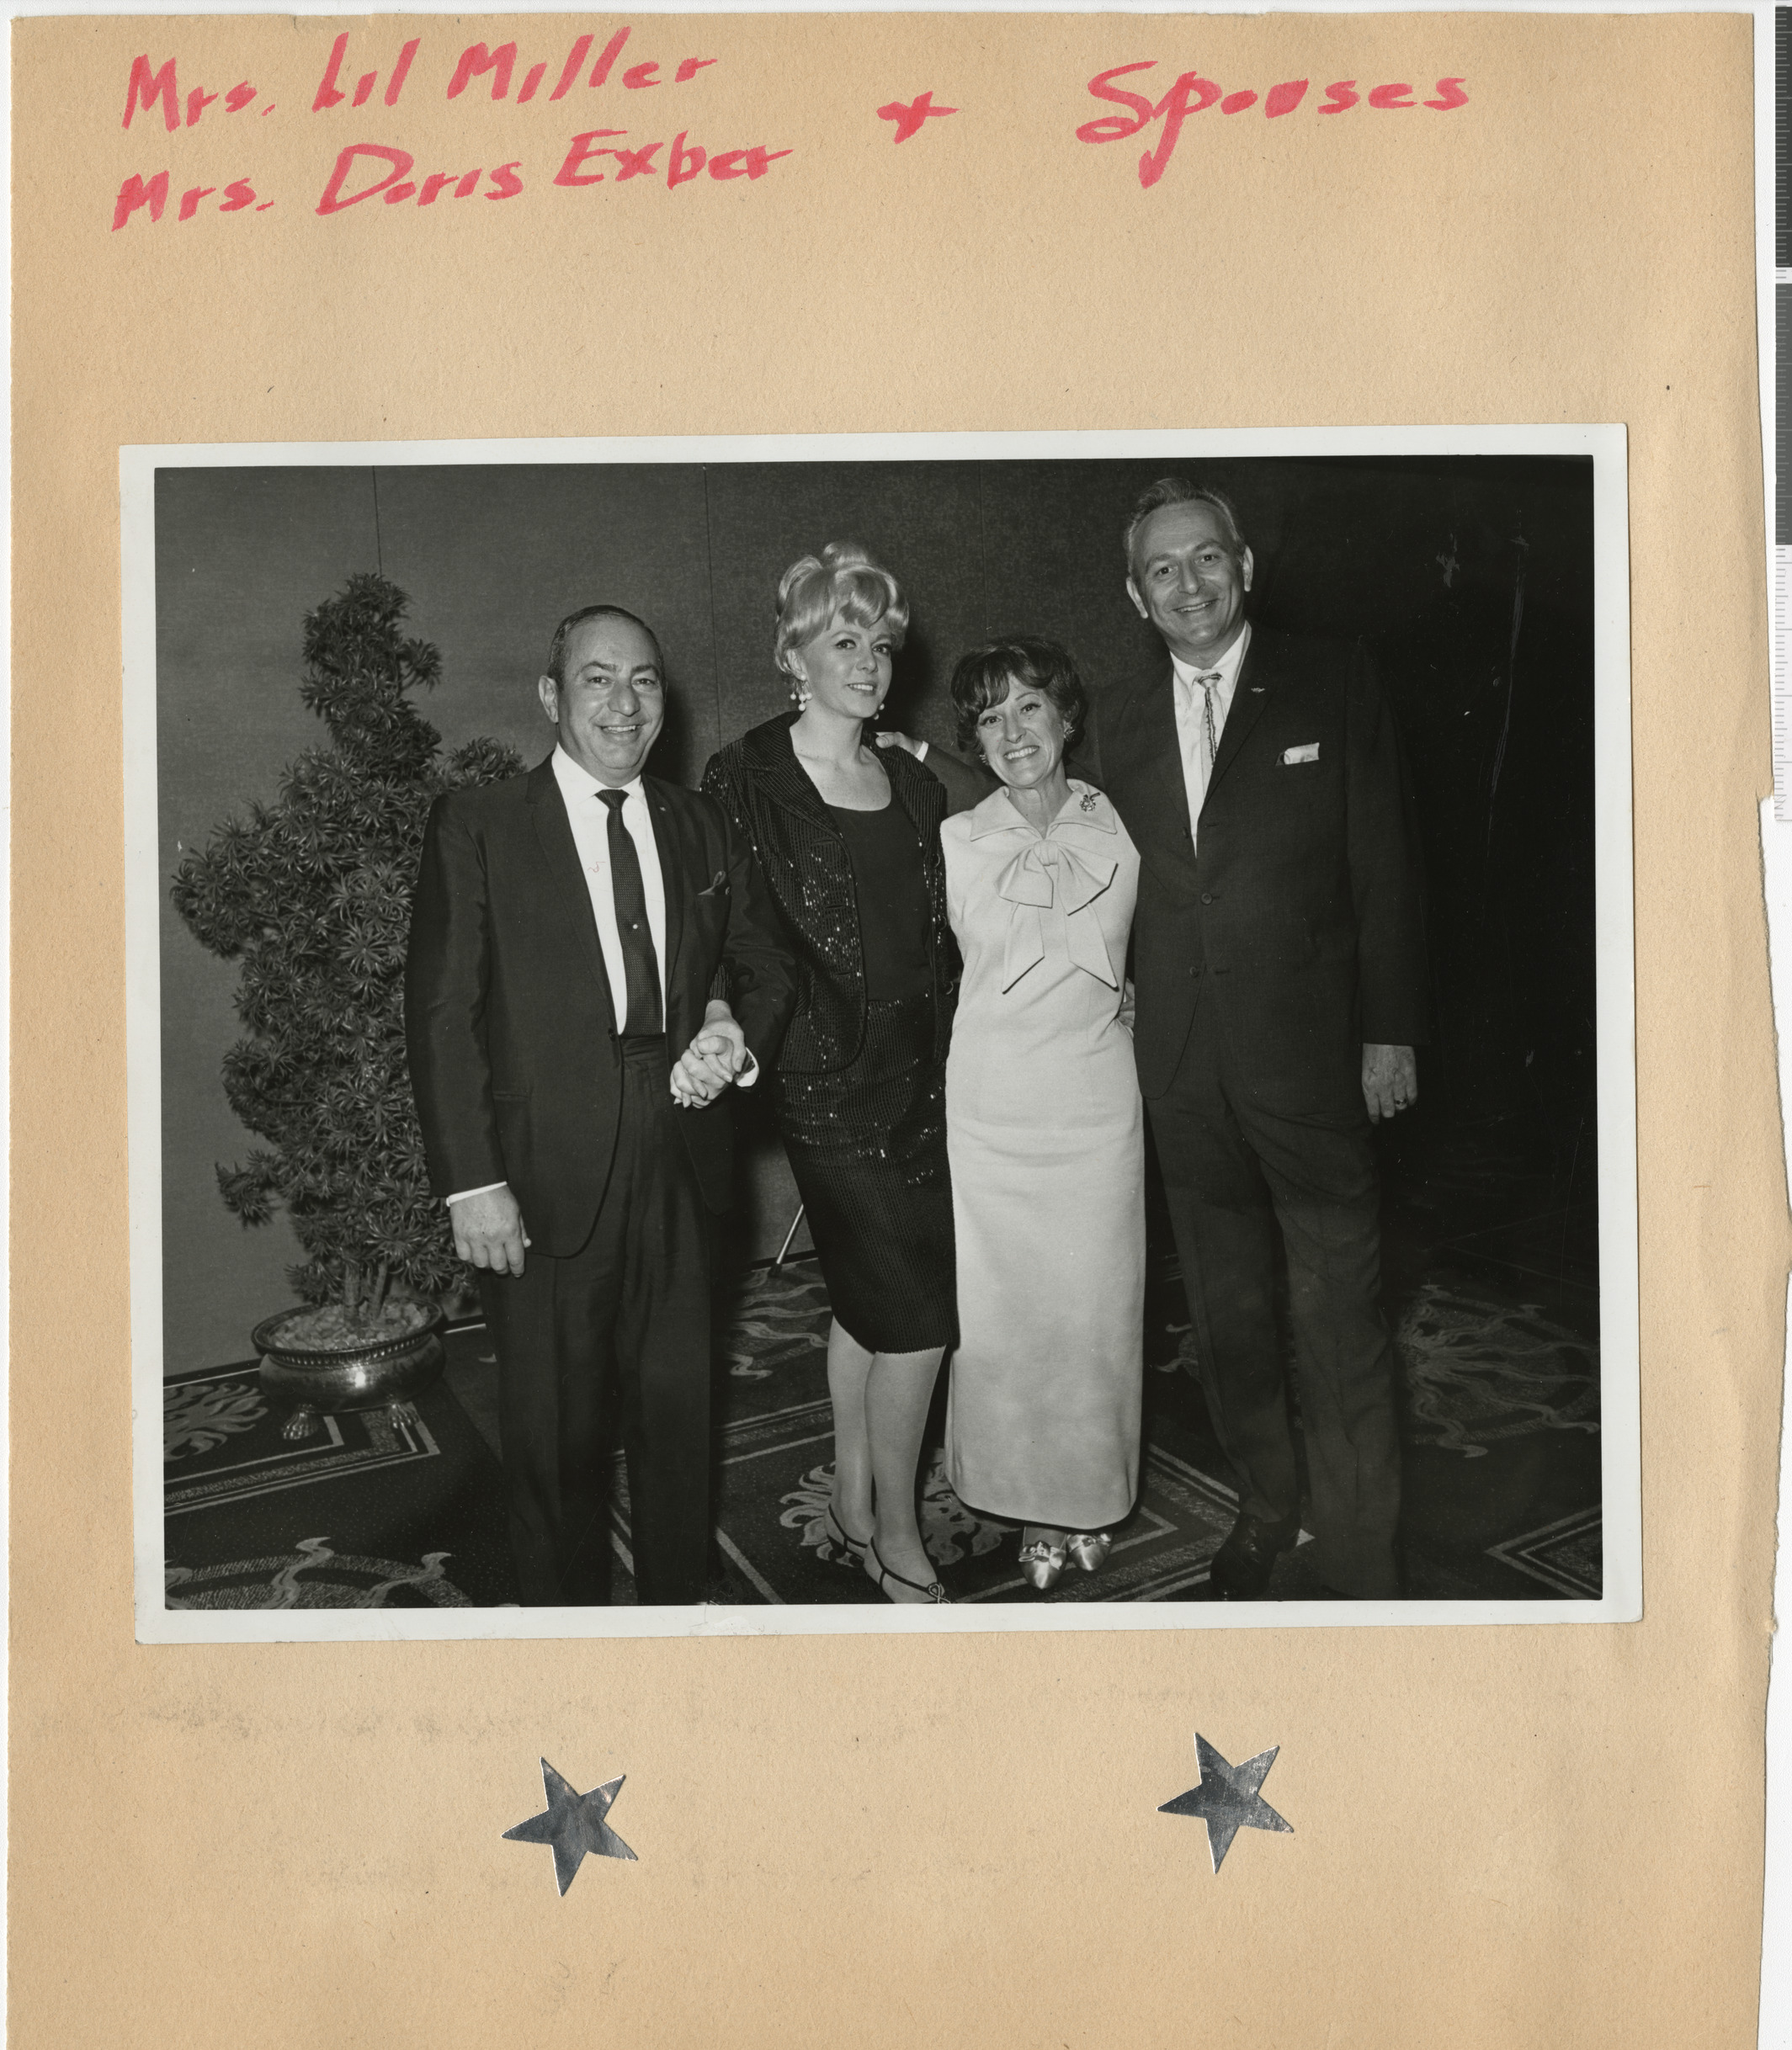 Photograph of Mrs. Doris Exber and Mrs. Lillian Miller with their spouses, June 1967